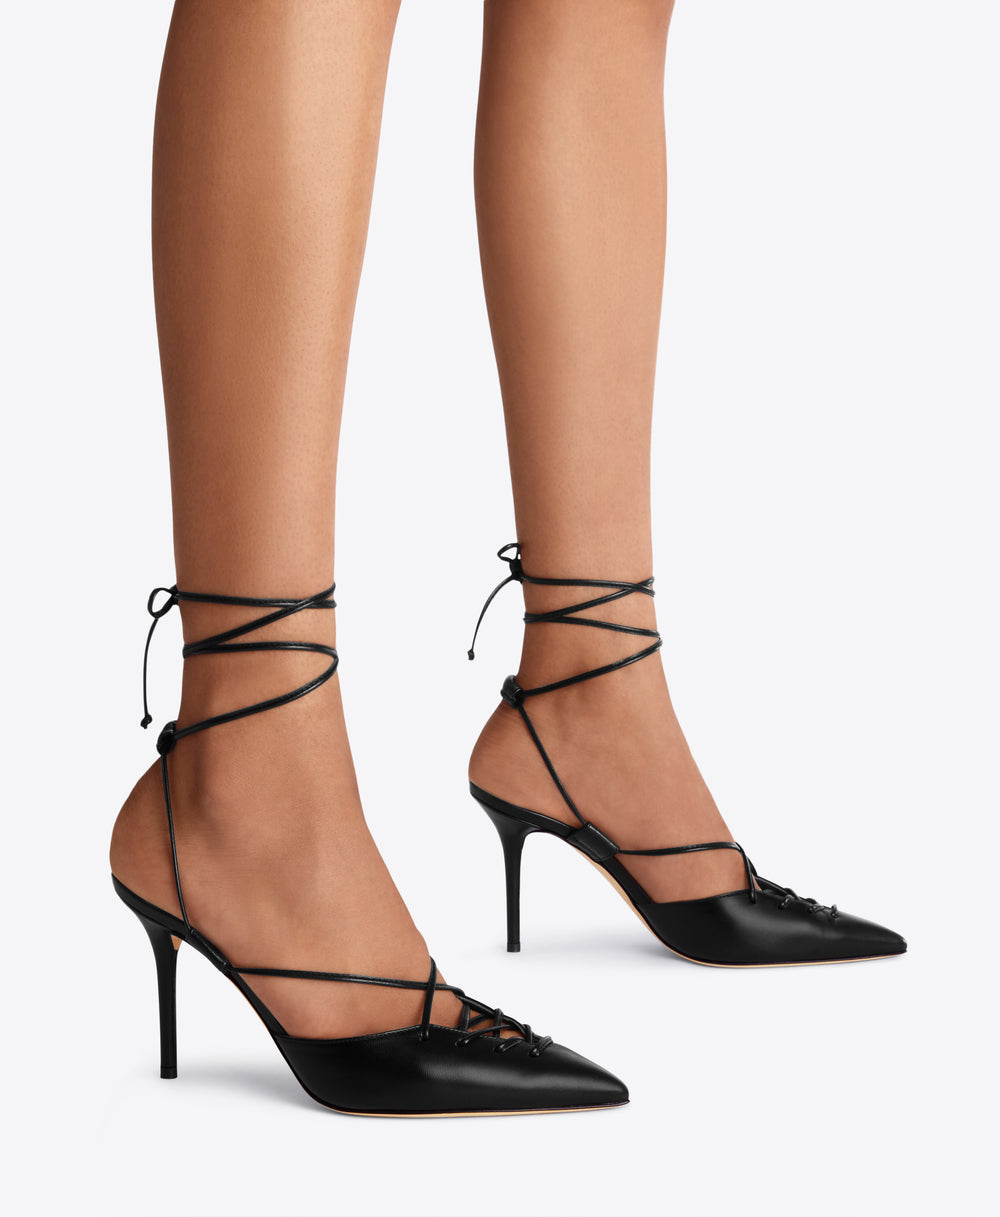 Black Leather Pointed Toe Stiletto Slingbacks with Ankle Tie | Malone Souliers 